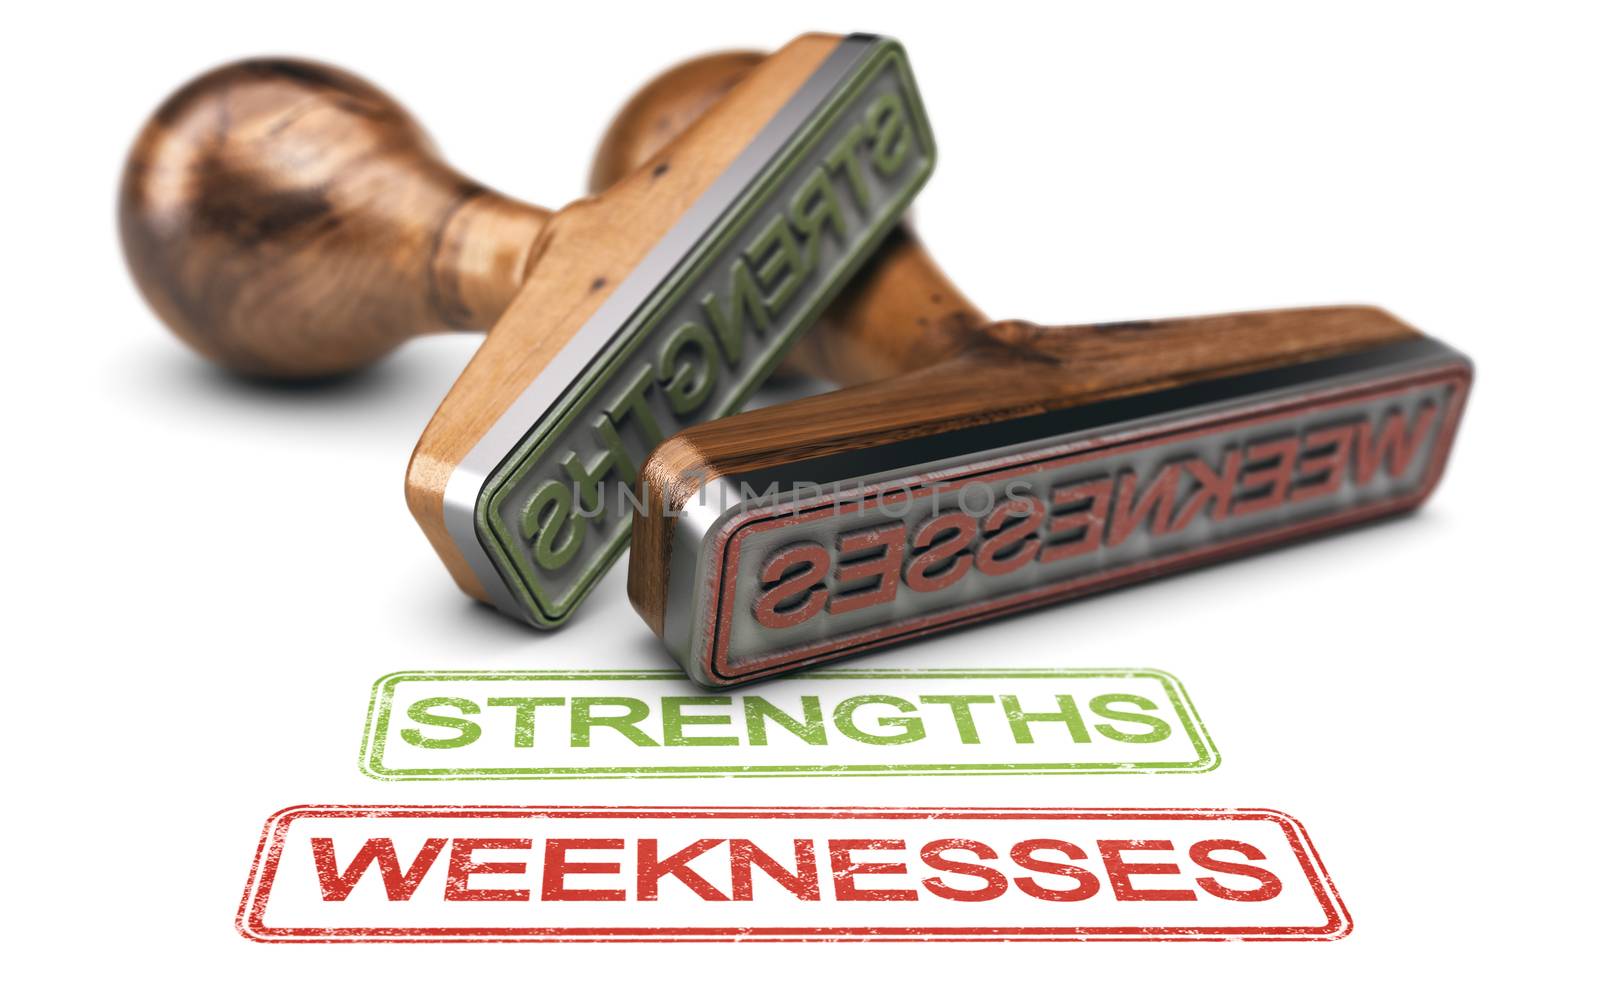 Strengths and Weeknesses Words And Two Rubber Stamps Over white  by Olivier-Le-Moal